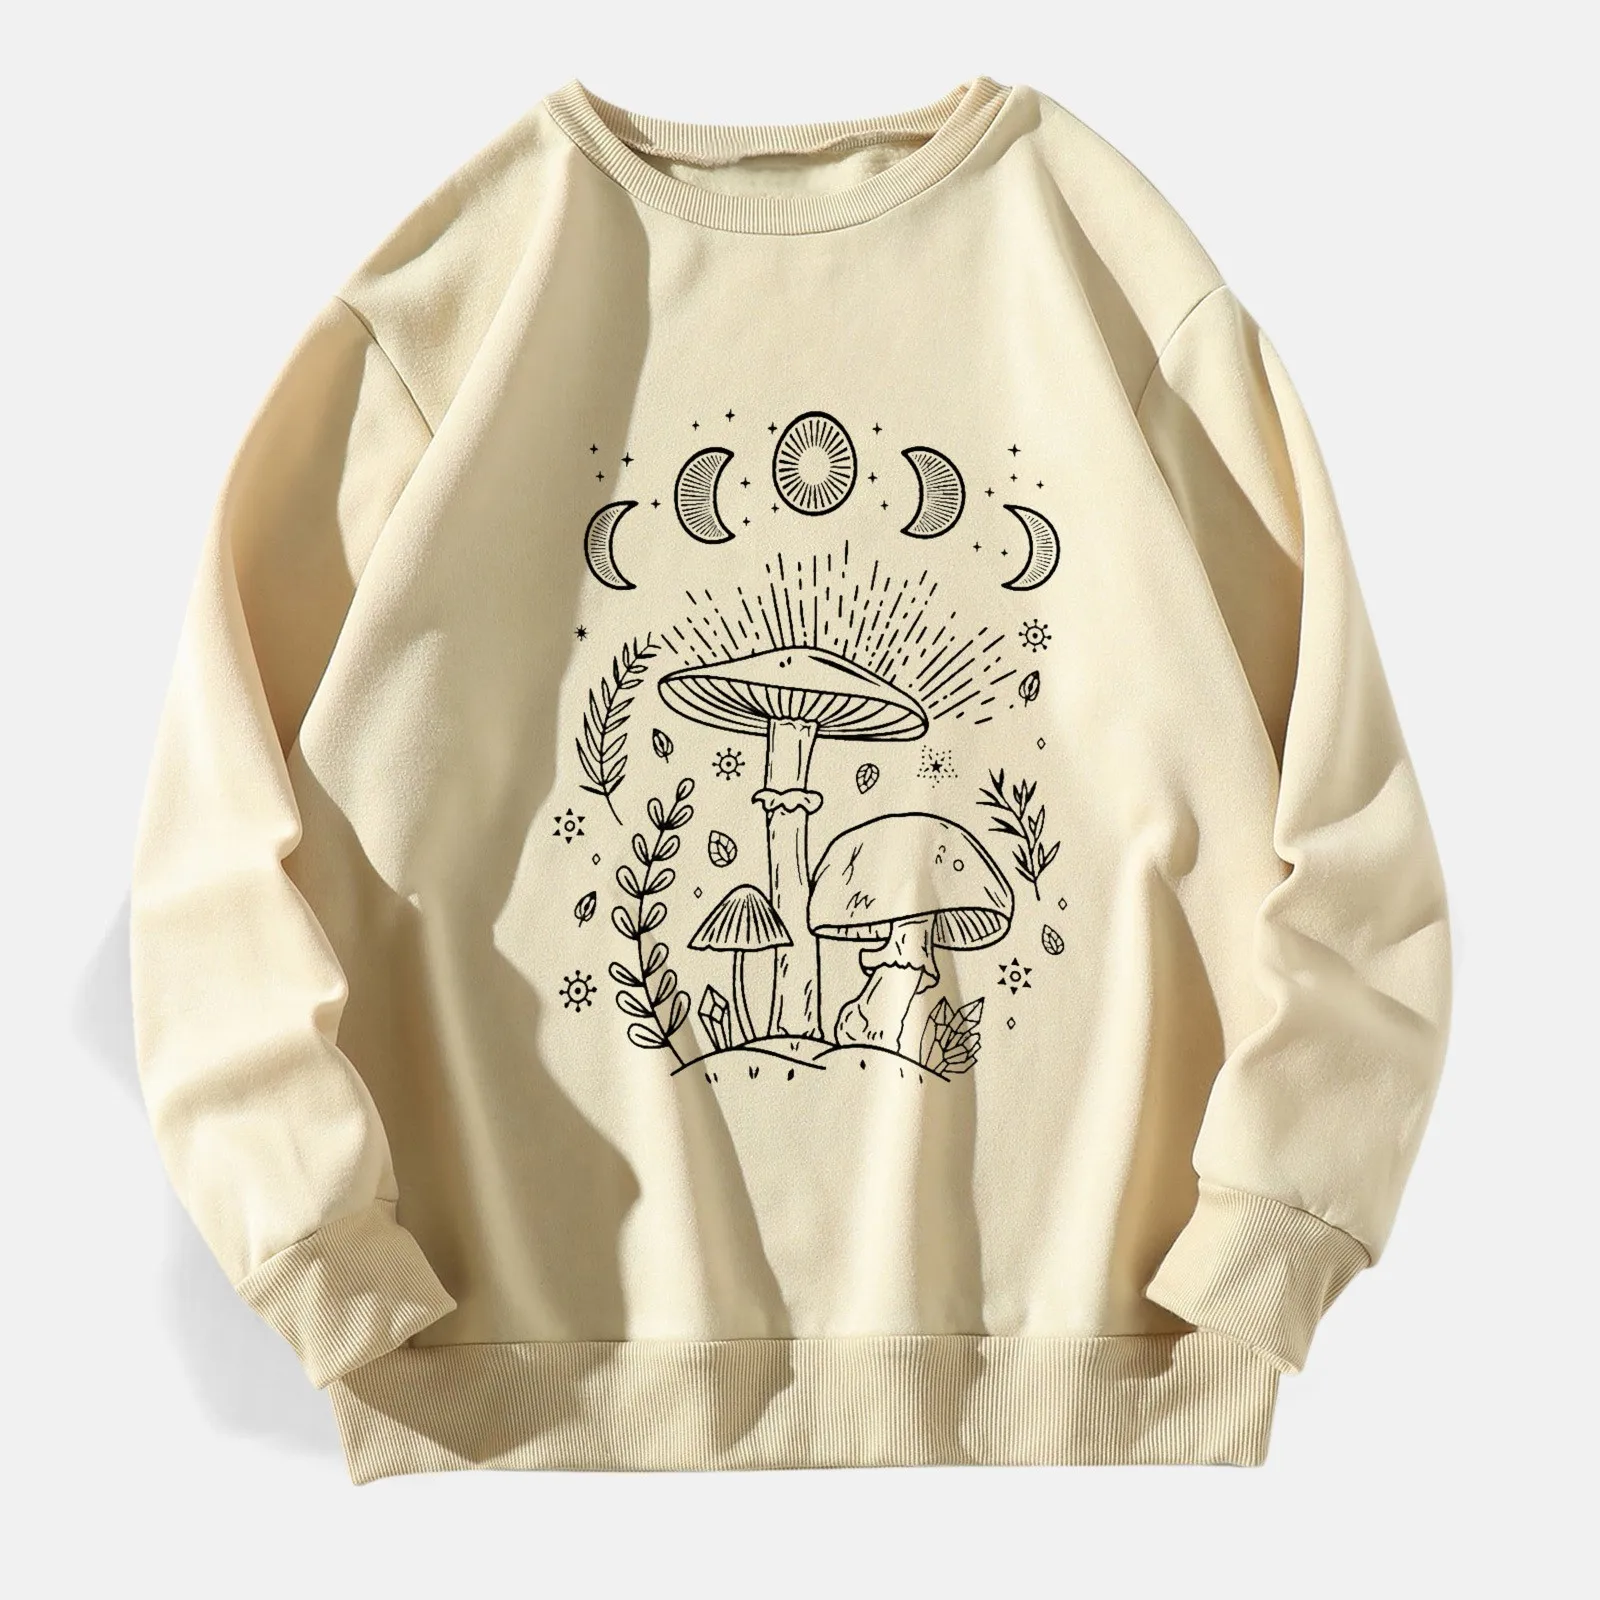 

French Sweatshirt Womens Fashionable Long Sleeved Sweater Solid Color Top All With Mushroom Printed High Collar Sweatshirt